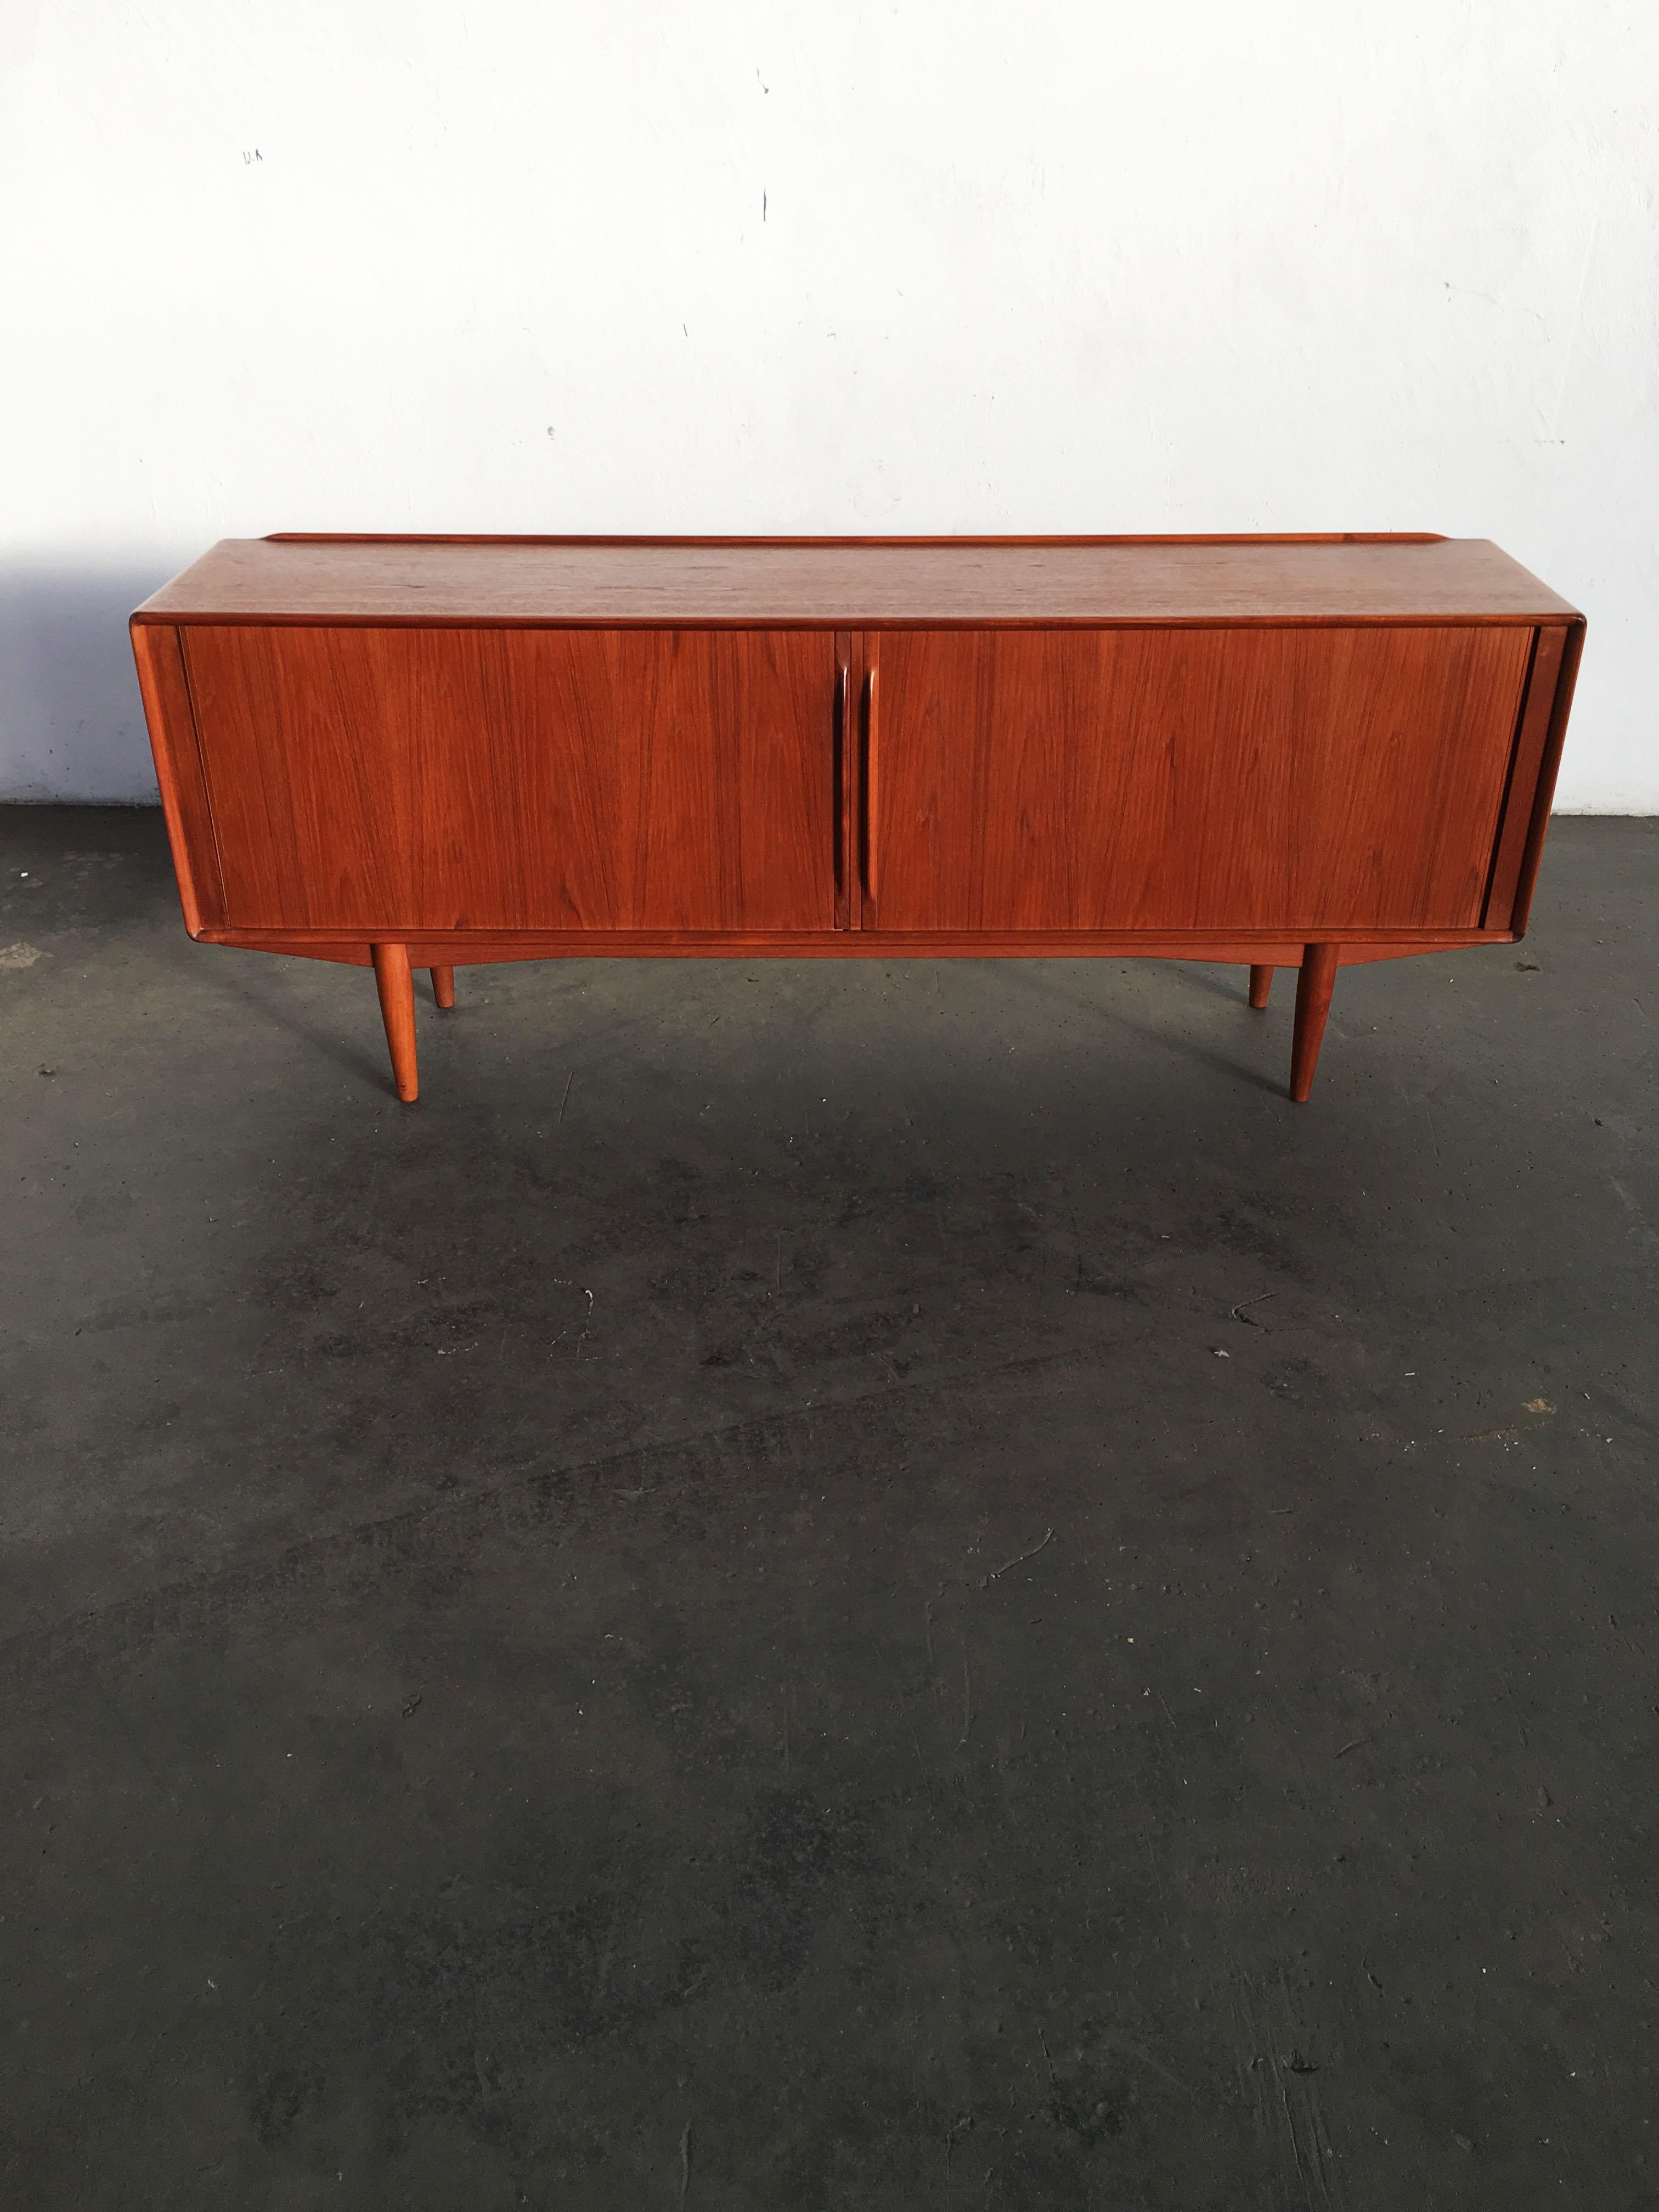 Mid-20th Century Large Teak Credenza Sideboard by Alf Aarseth for Gustav Bahus, Norway, 1960s For Sale